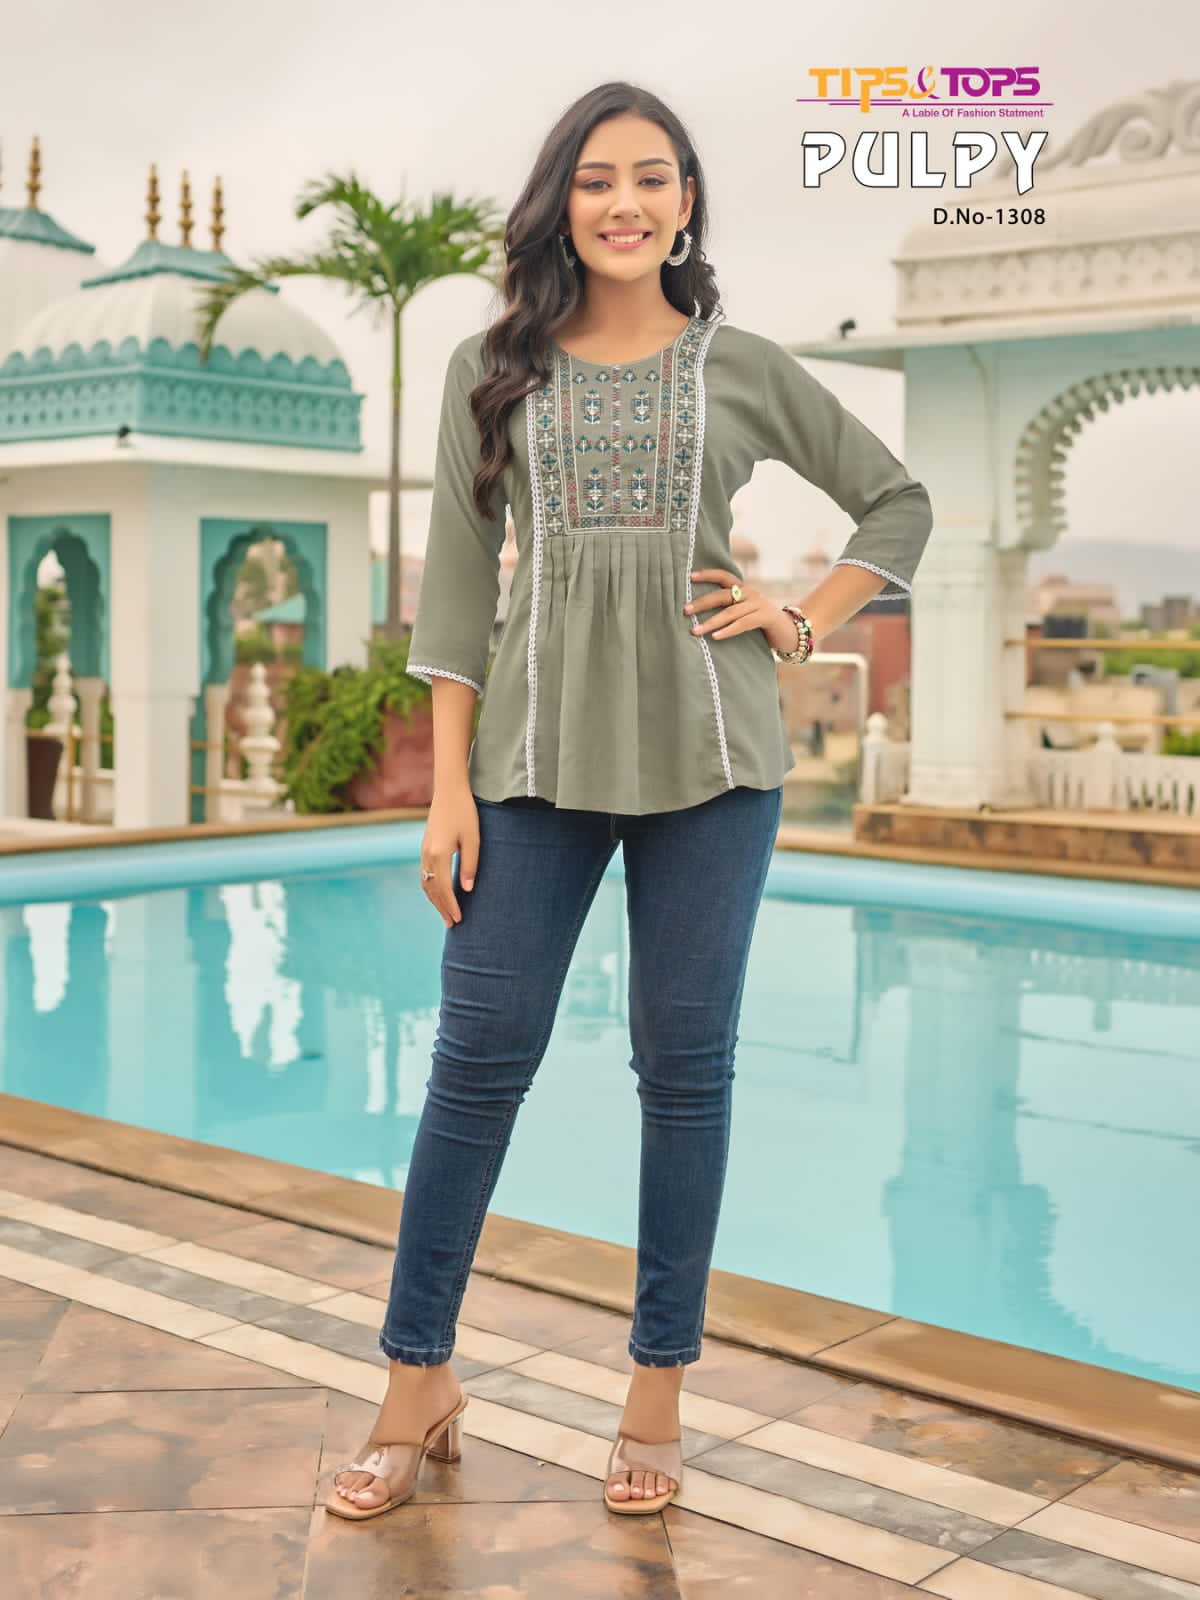 Tips Tops Pulpy Vol 13 Ladies Tops Catalog collection 1